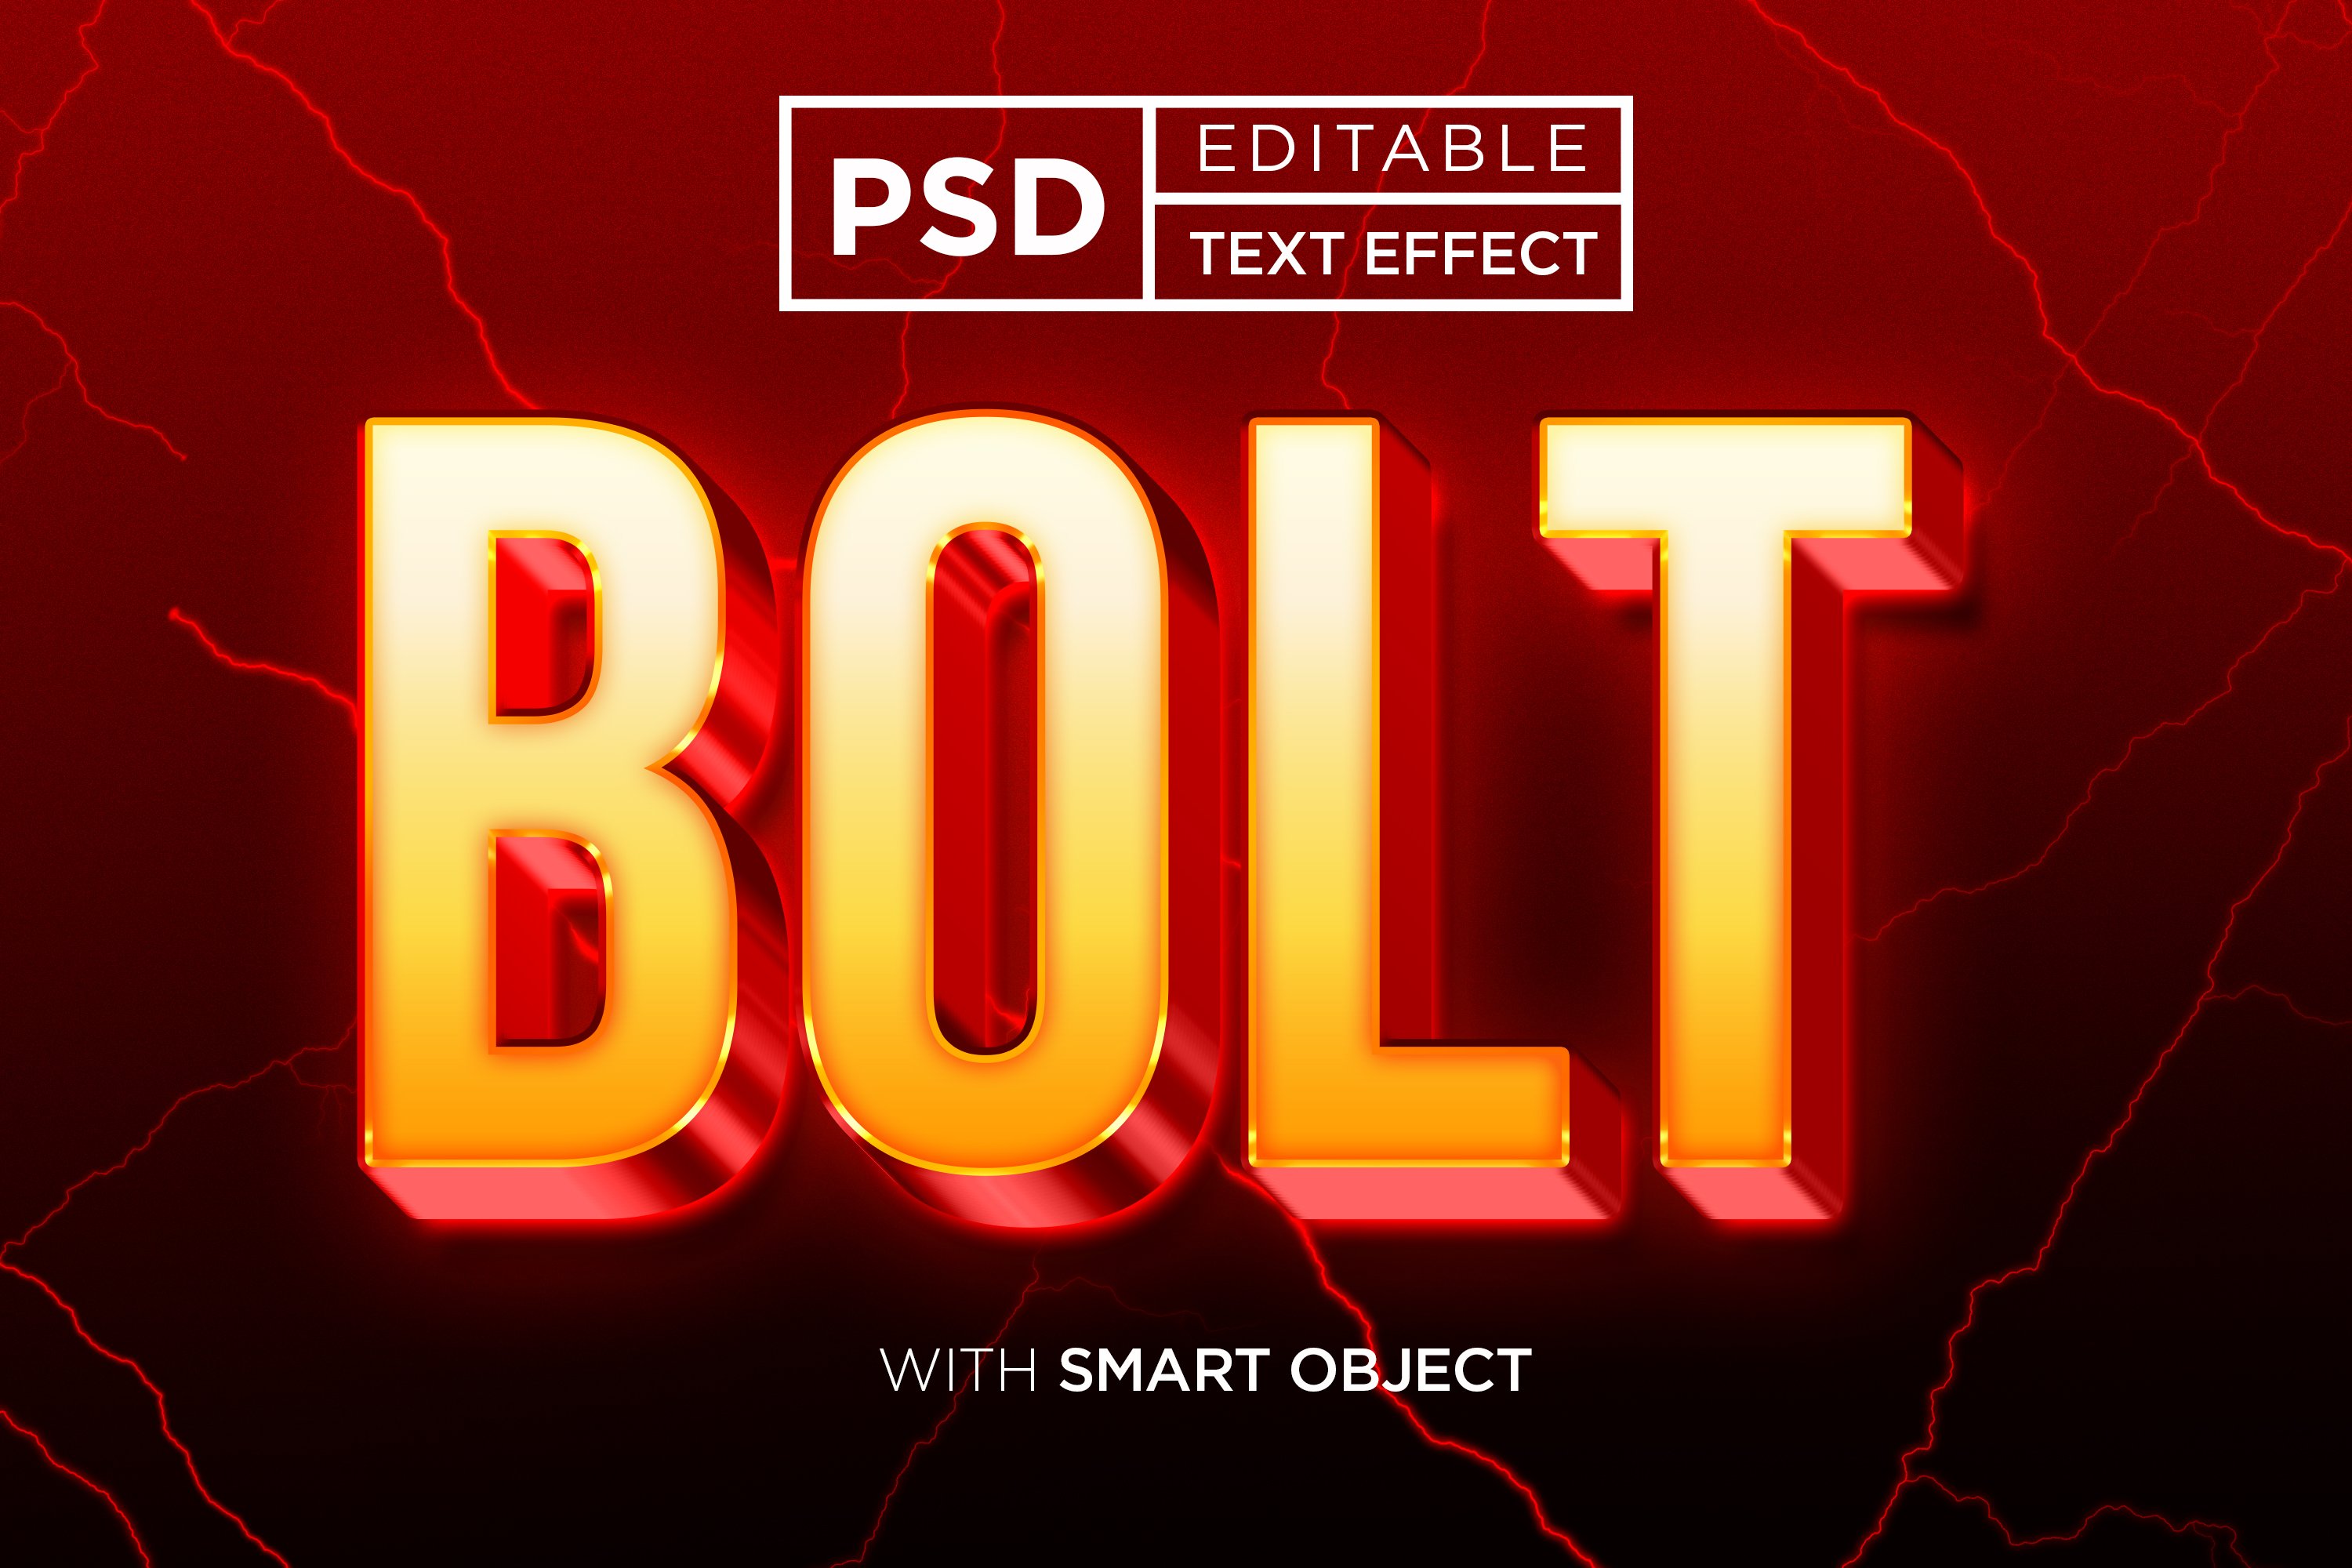 BOLT TEXT EFFECT MOCKUP TEMPLATEcover image.